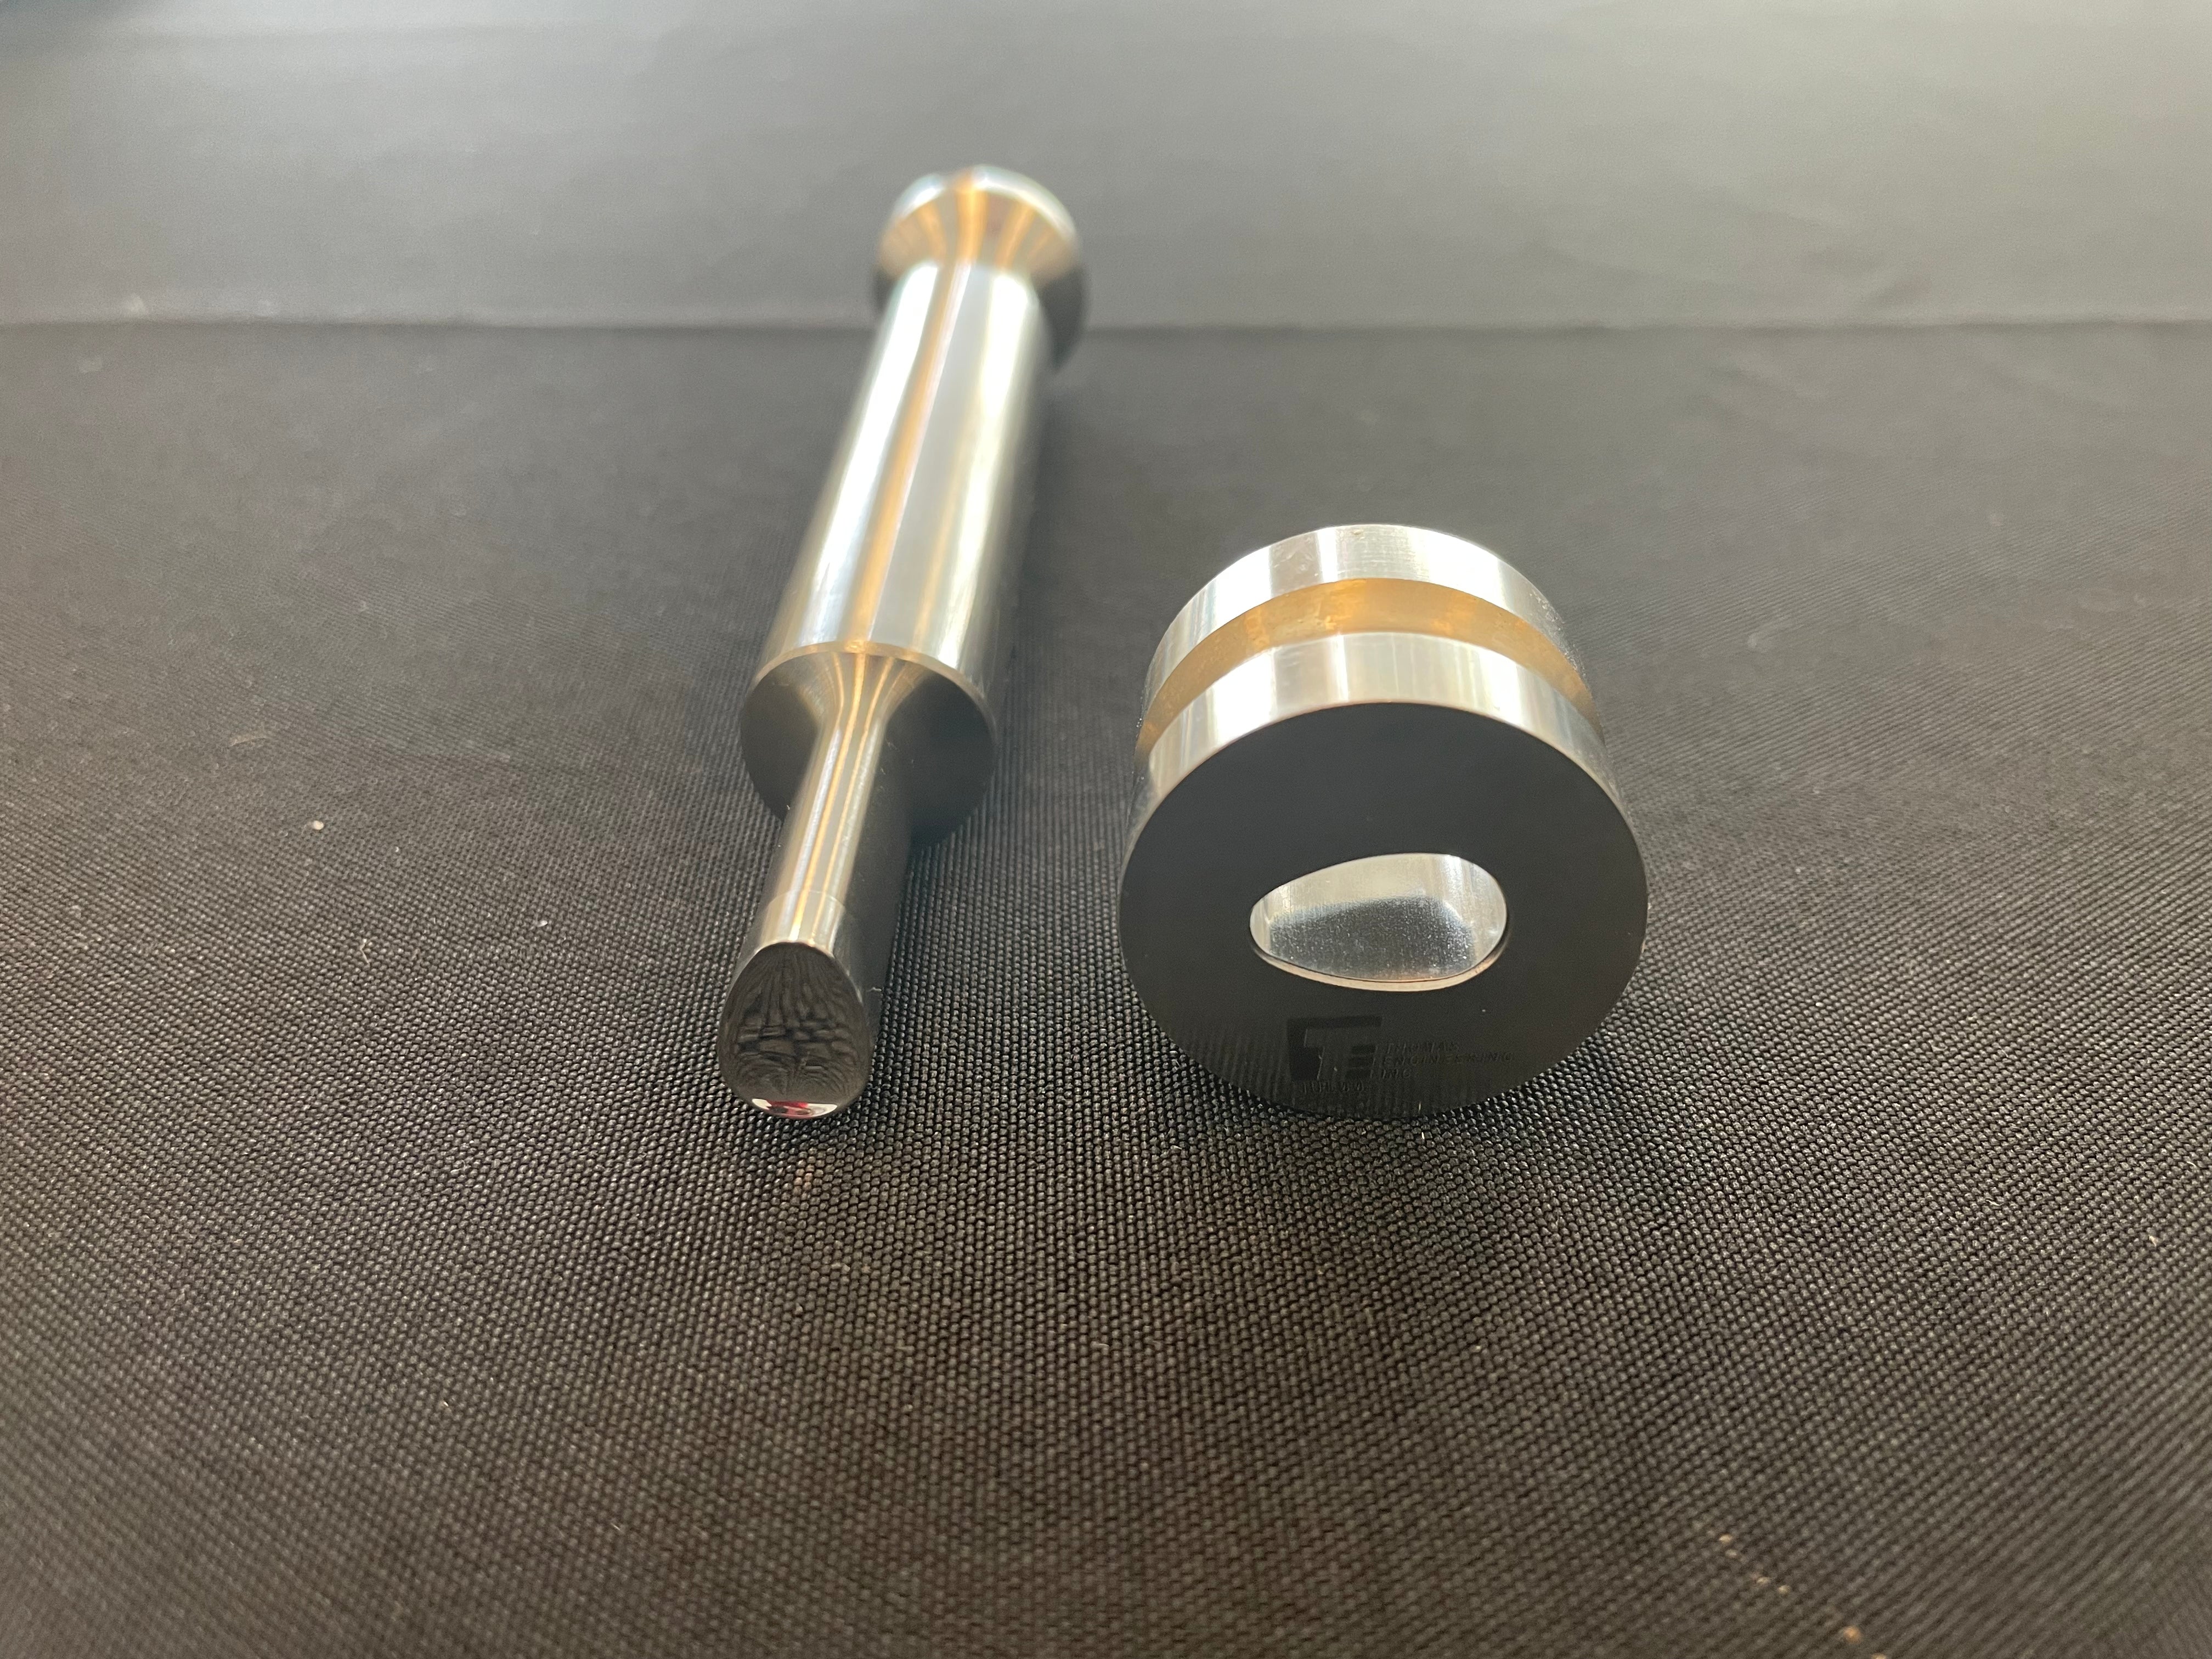 Almond Shaped Lower Punches and Dies IPT B (0.3609"x0.5724")